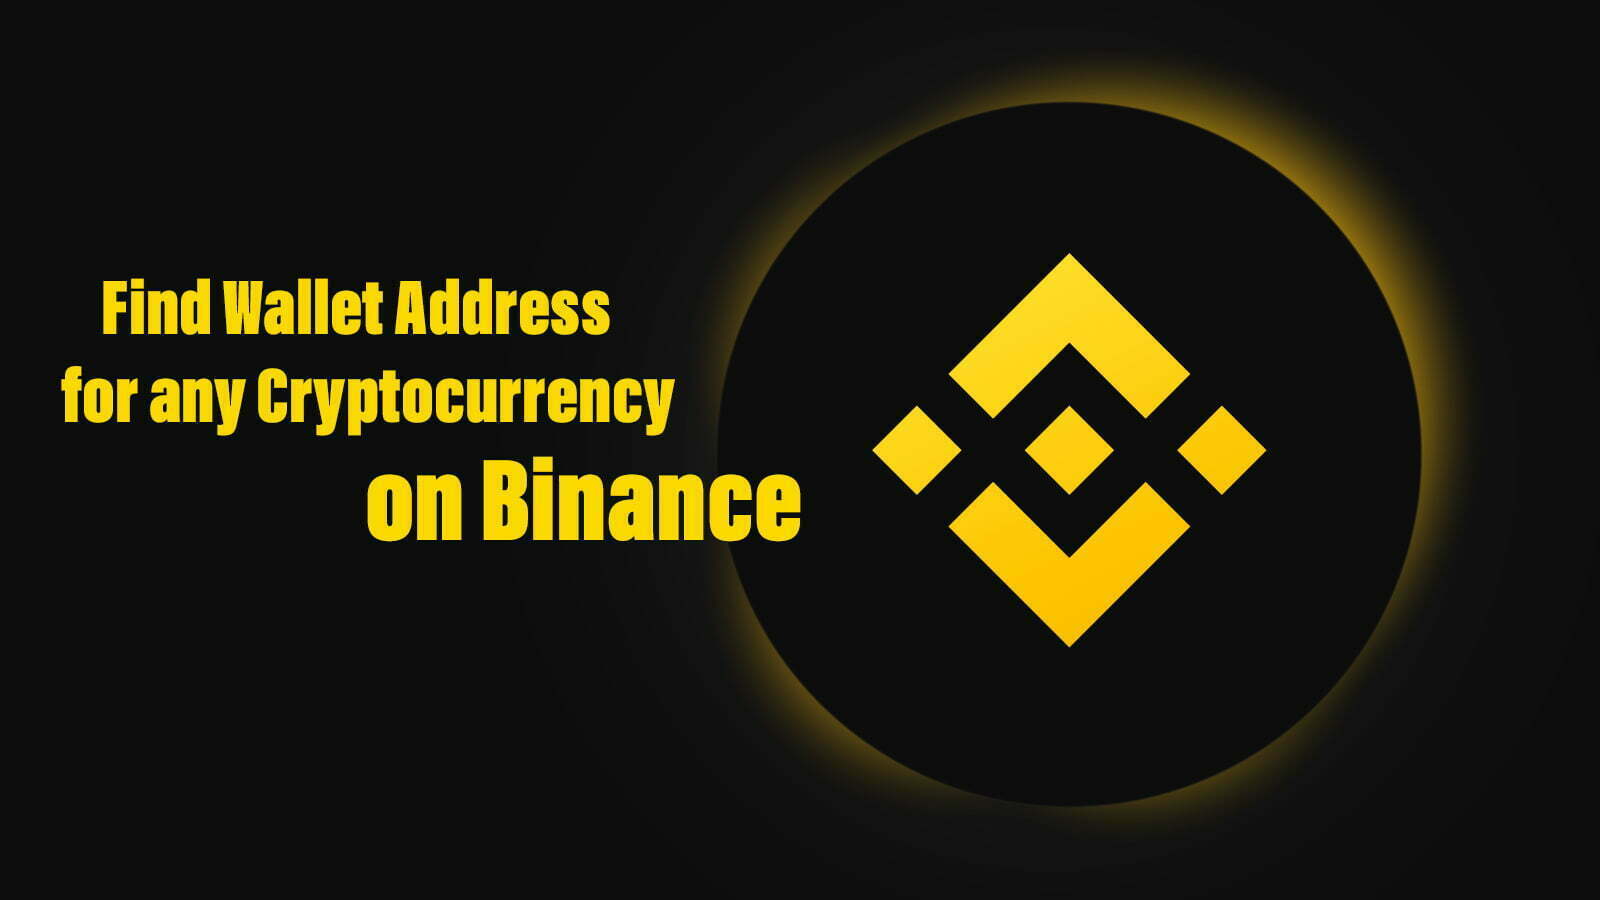 How to Find Wallet Address for any Cryptocurrency on Binance